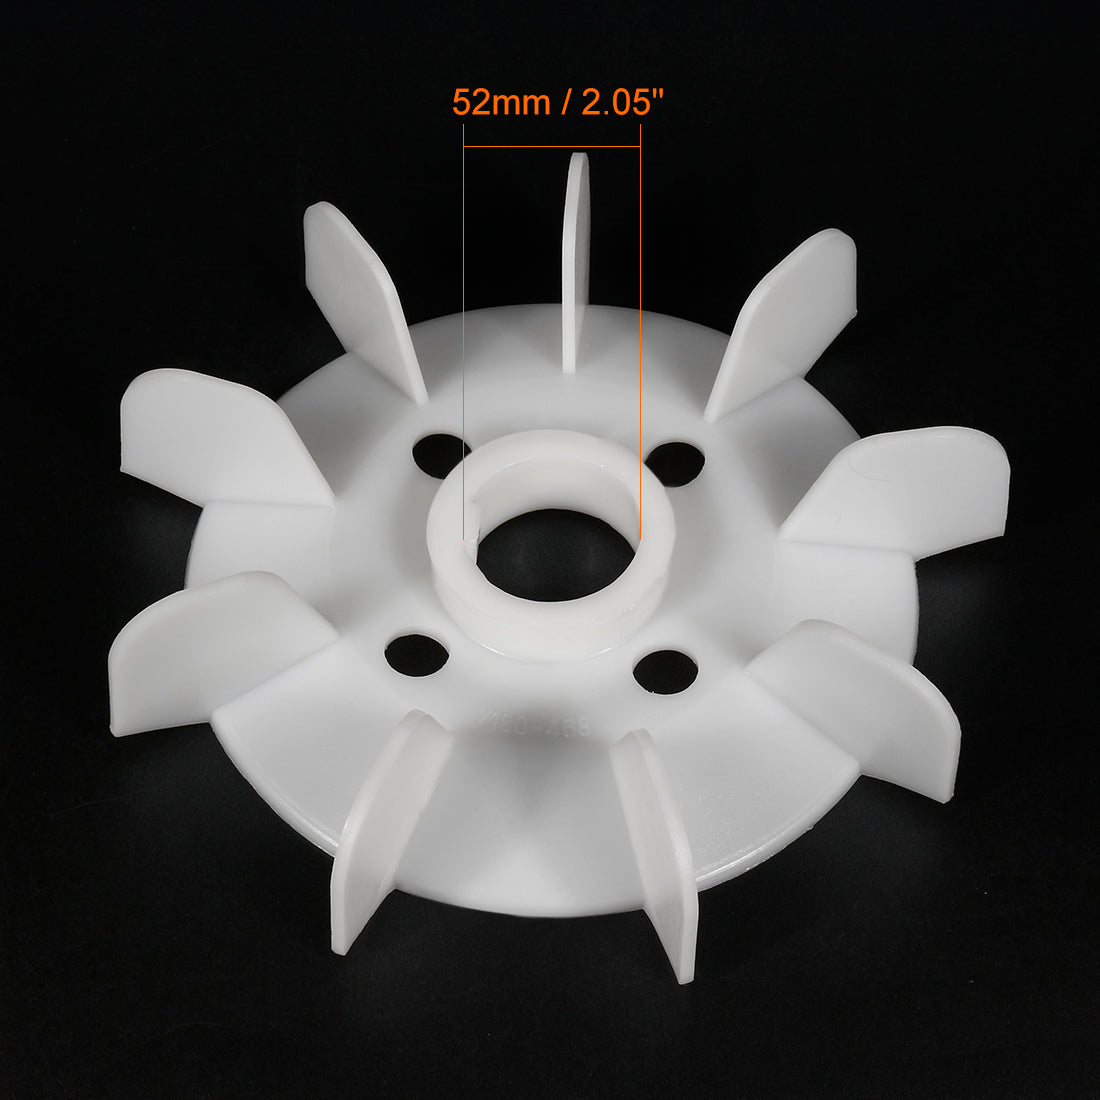 uxcell Uxcell 2Pcs 275*52mm Round Shaft Replacement White Plastic 9 Impeller Motor Fan Vane